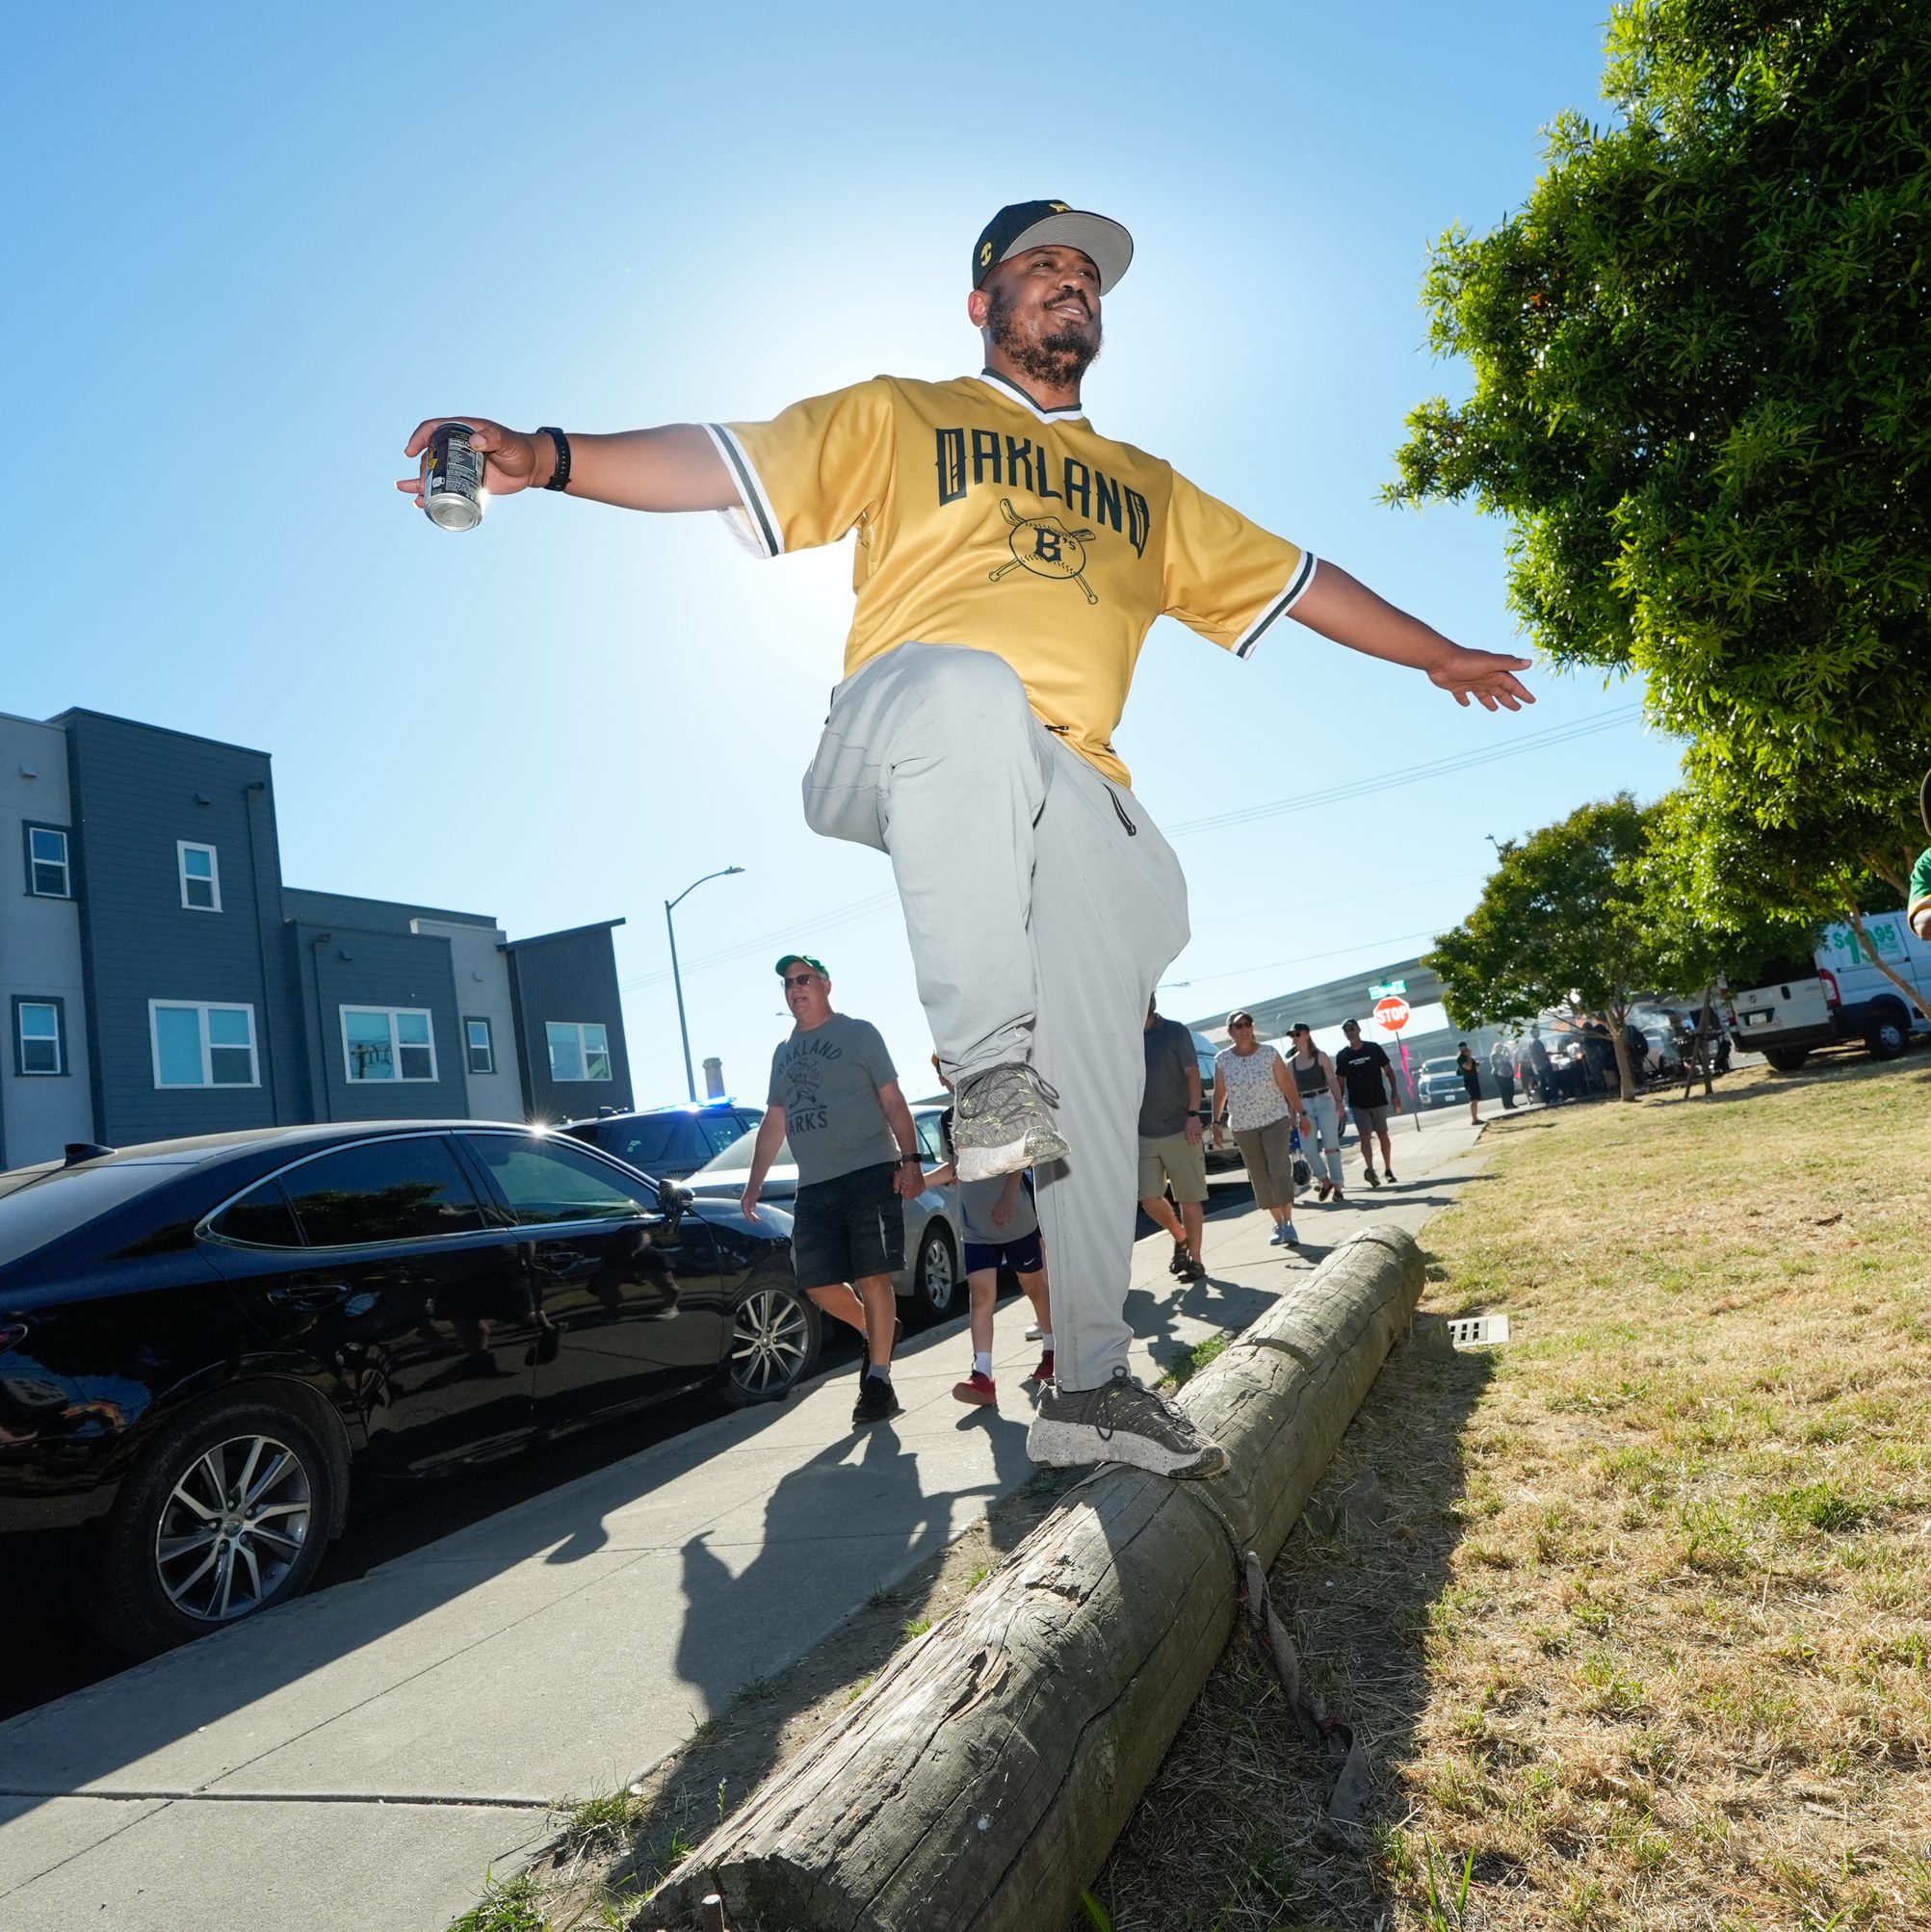 A man balances on a log while holding a drink. He is wearing an Oakland jersey and cap. People walk on the sidewalk next to parked cars in a sunny residential area.